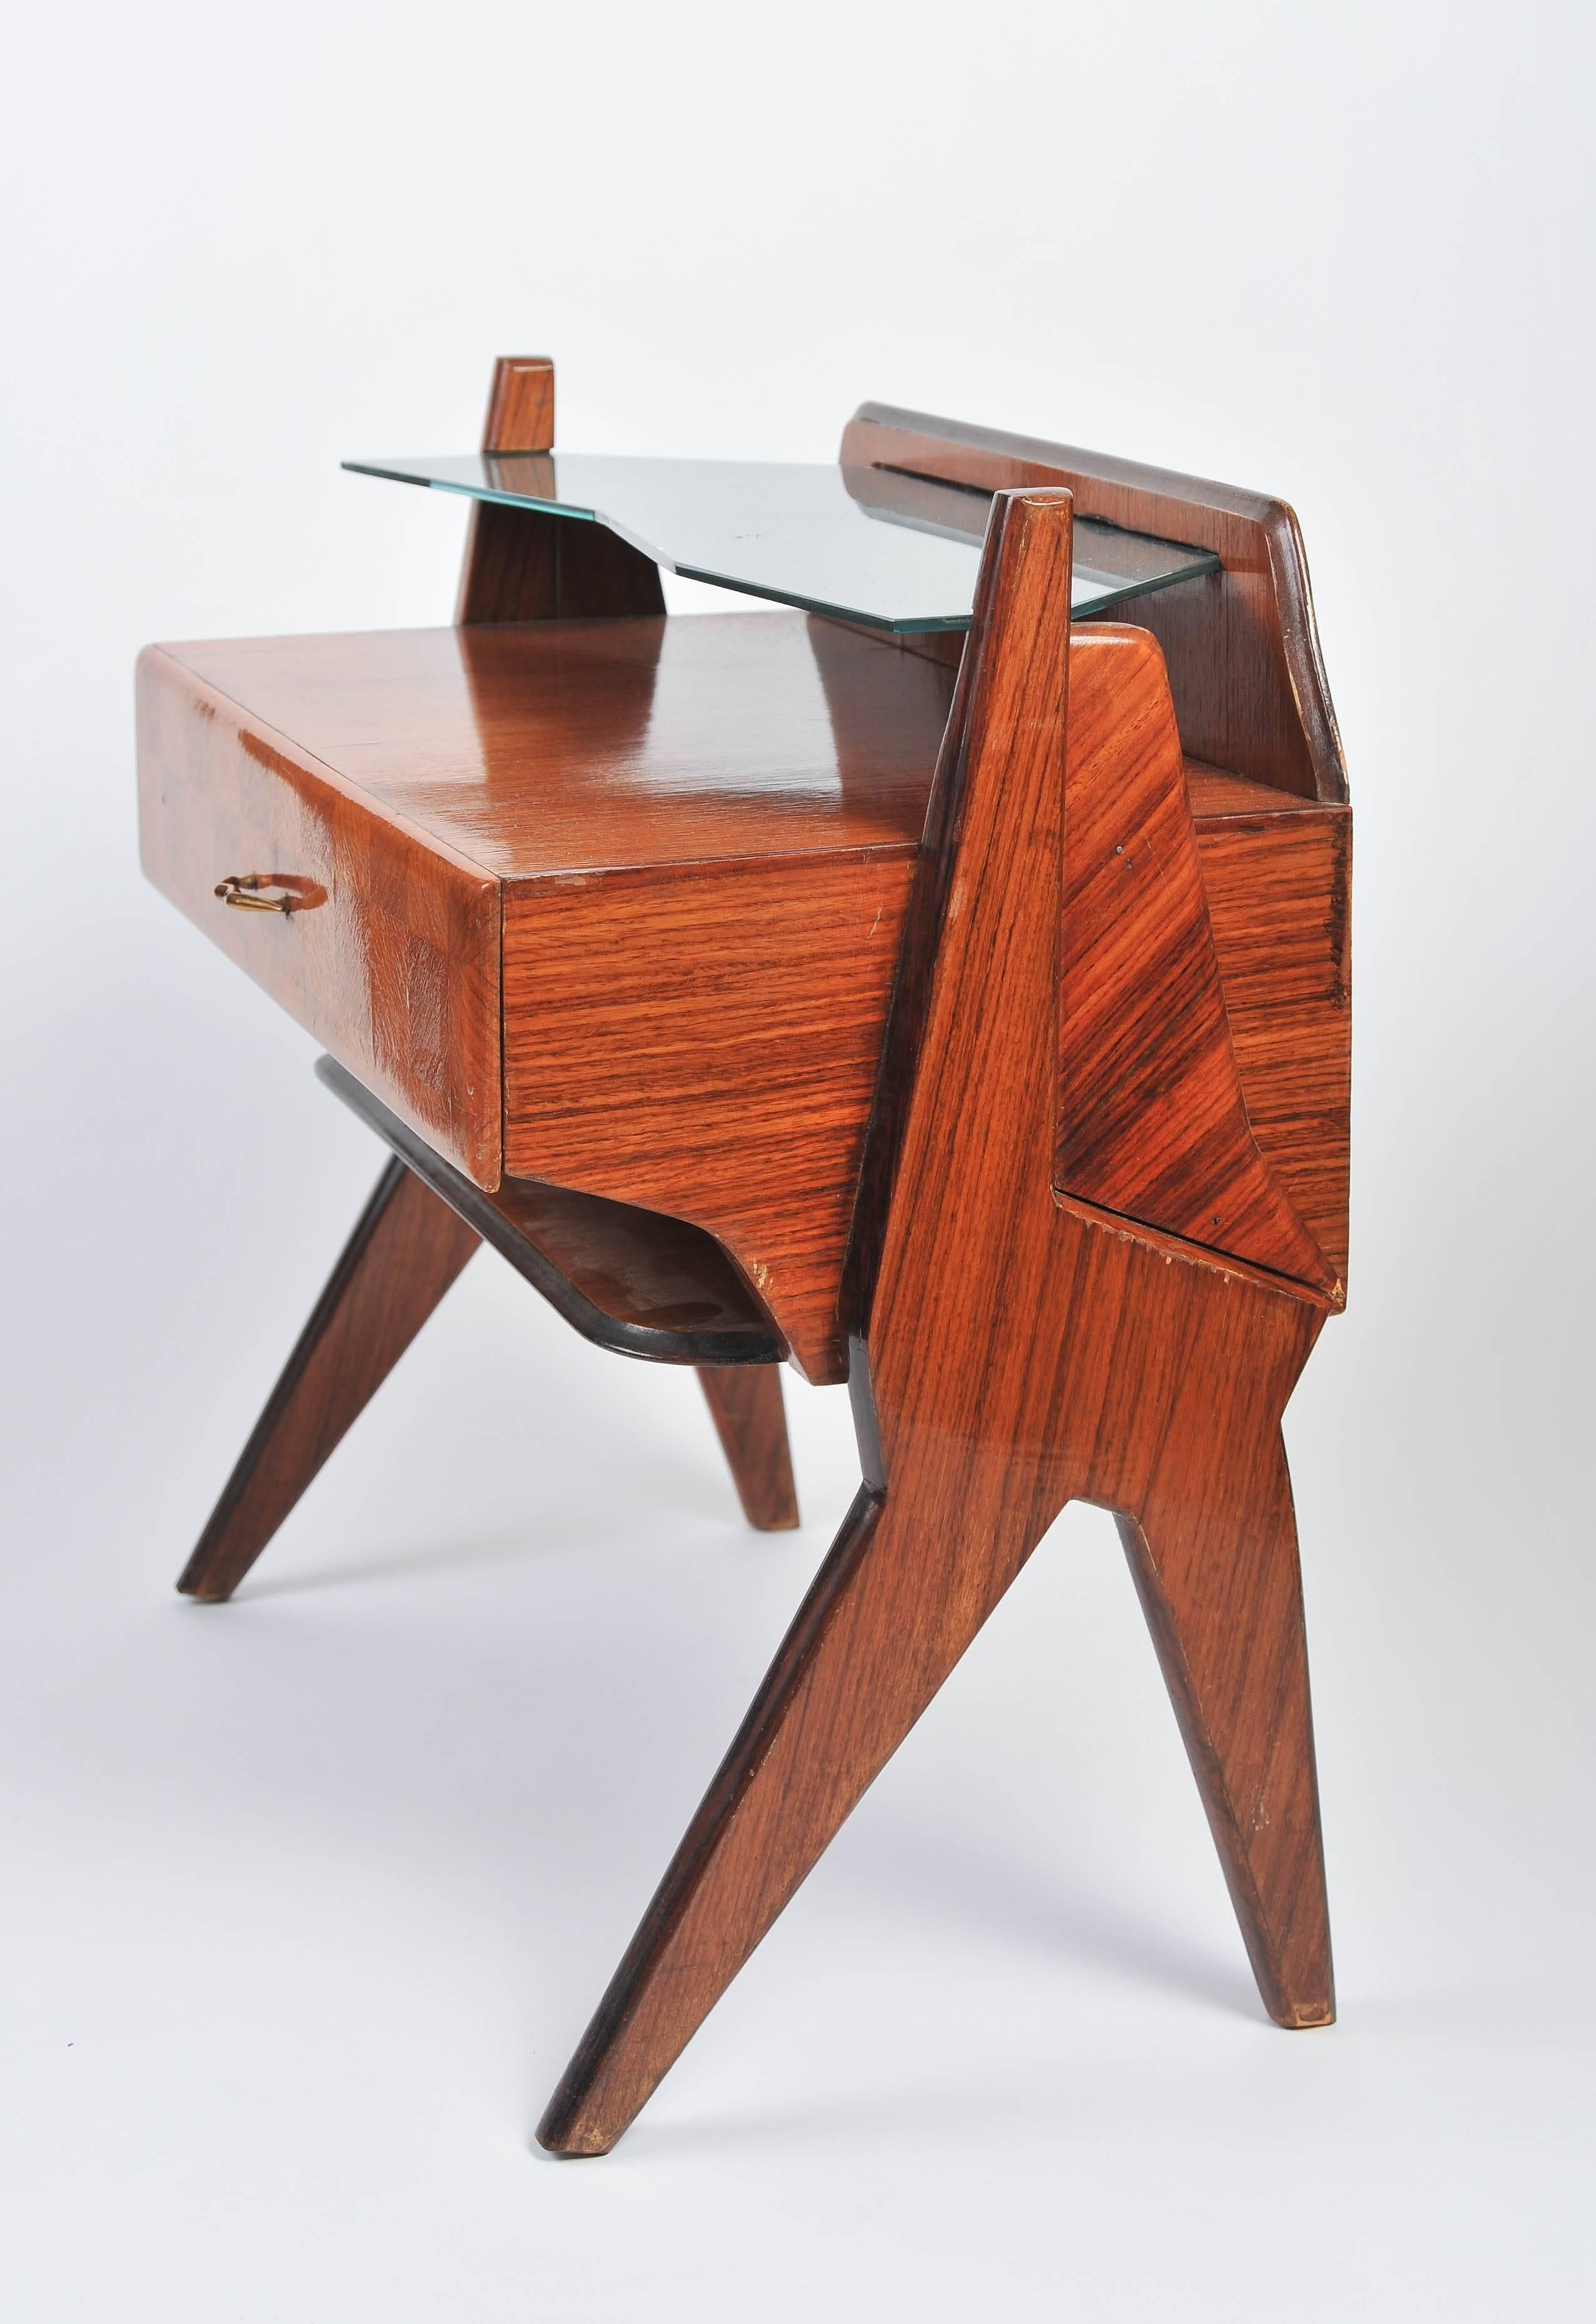 1945-1950 Pair of Side Tables Attributed to Vittorio Dassi 1